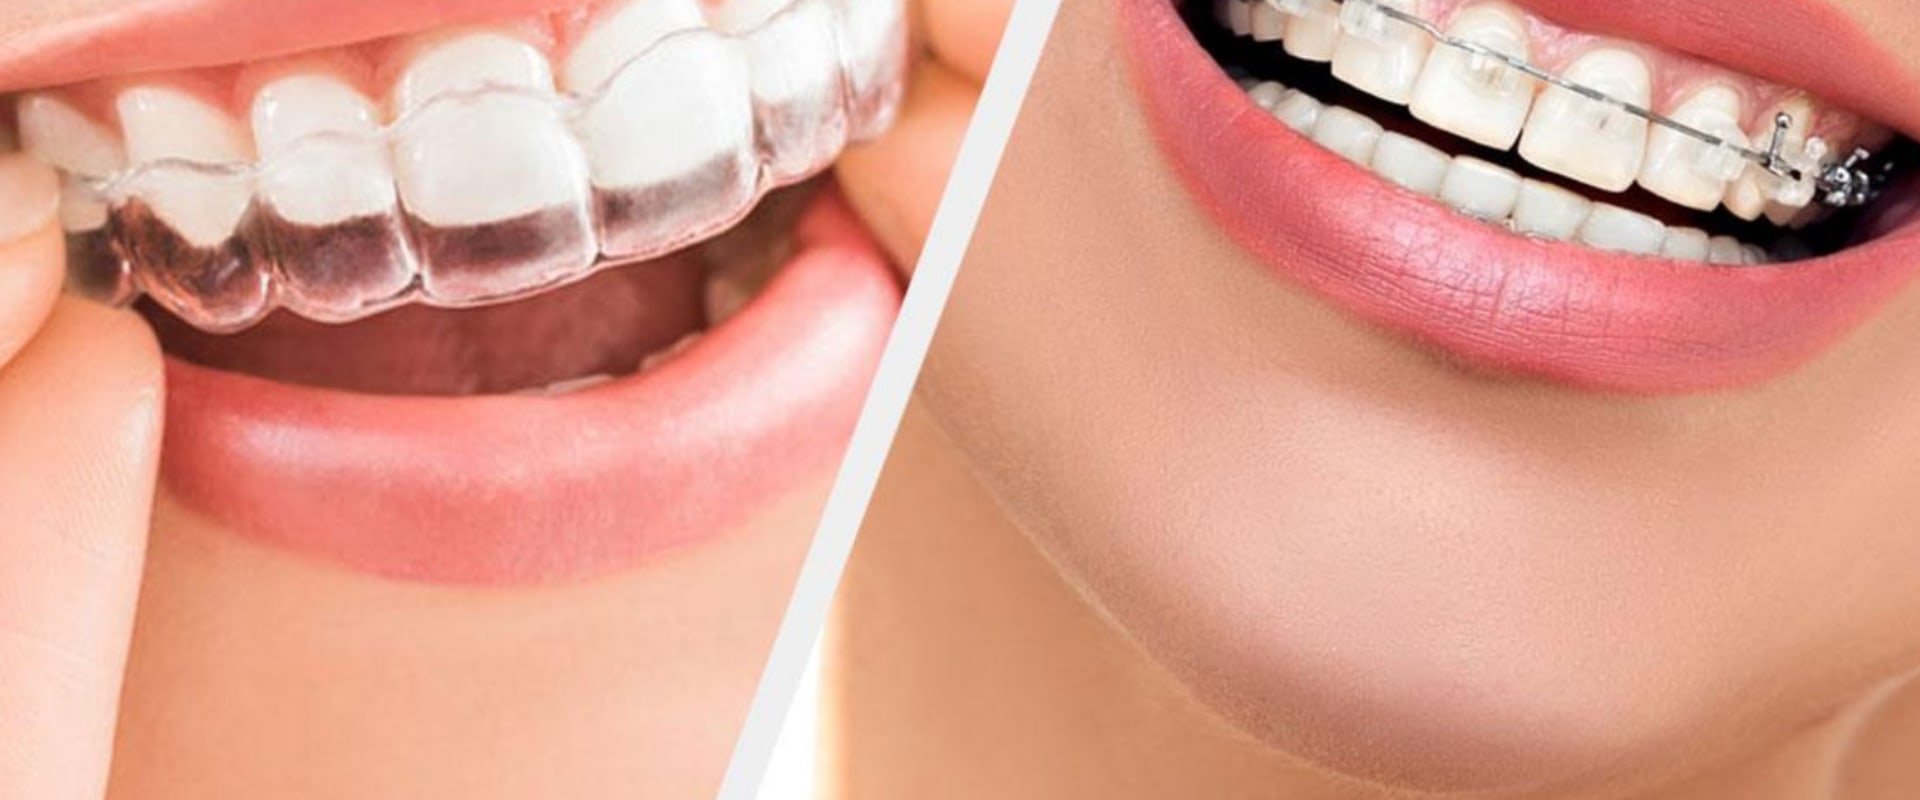 Specialised Treatments for Adults with Jaw Problems from a UK Orthodontist